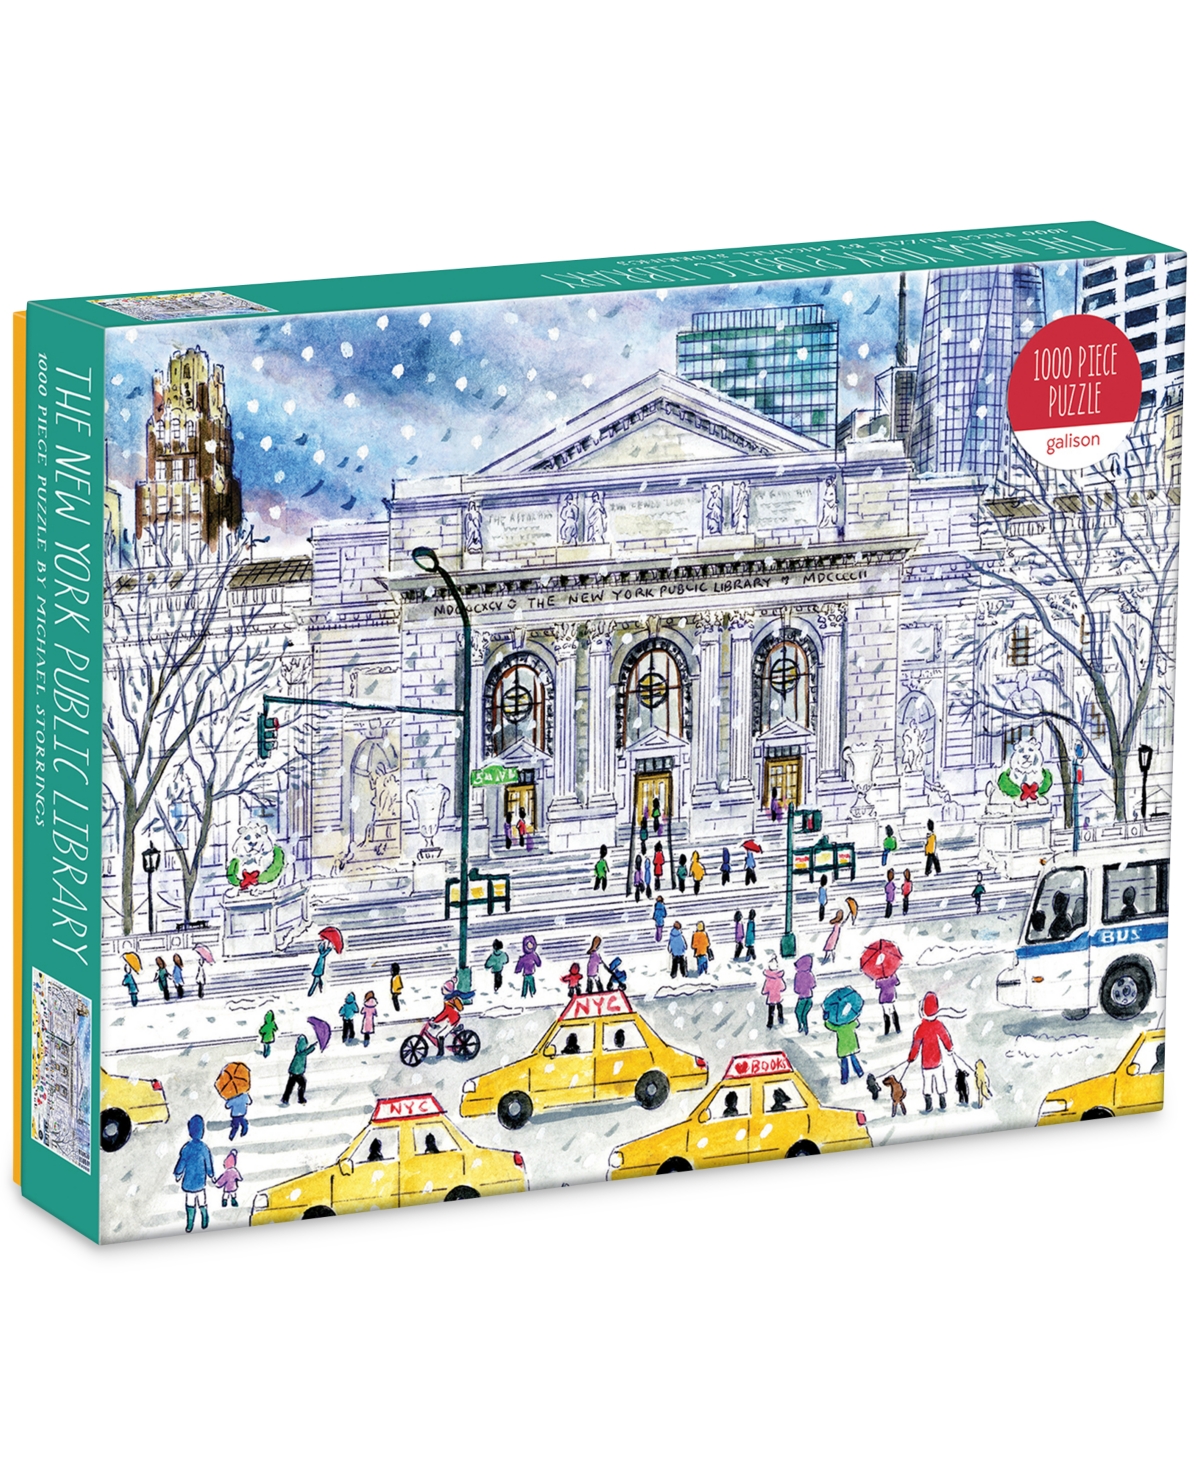 1000-Piece Galison Jigsaw Puzzles (5th Avenue, Times Square & More) $4.25 each at Macy's w/ Free Store Pickup